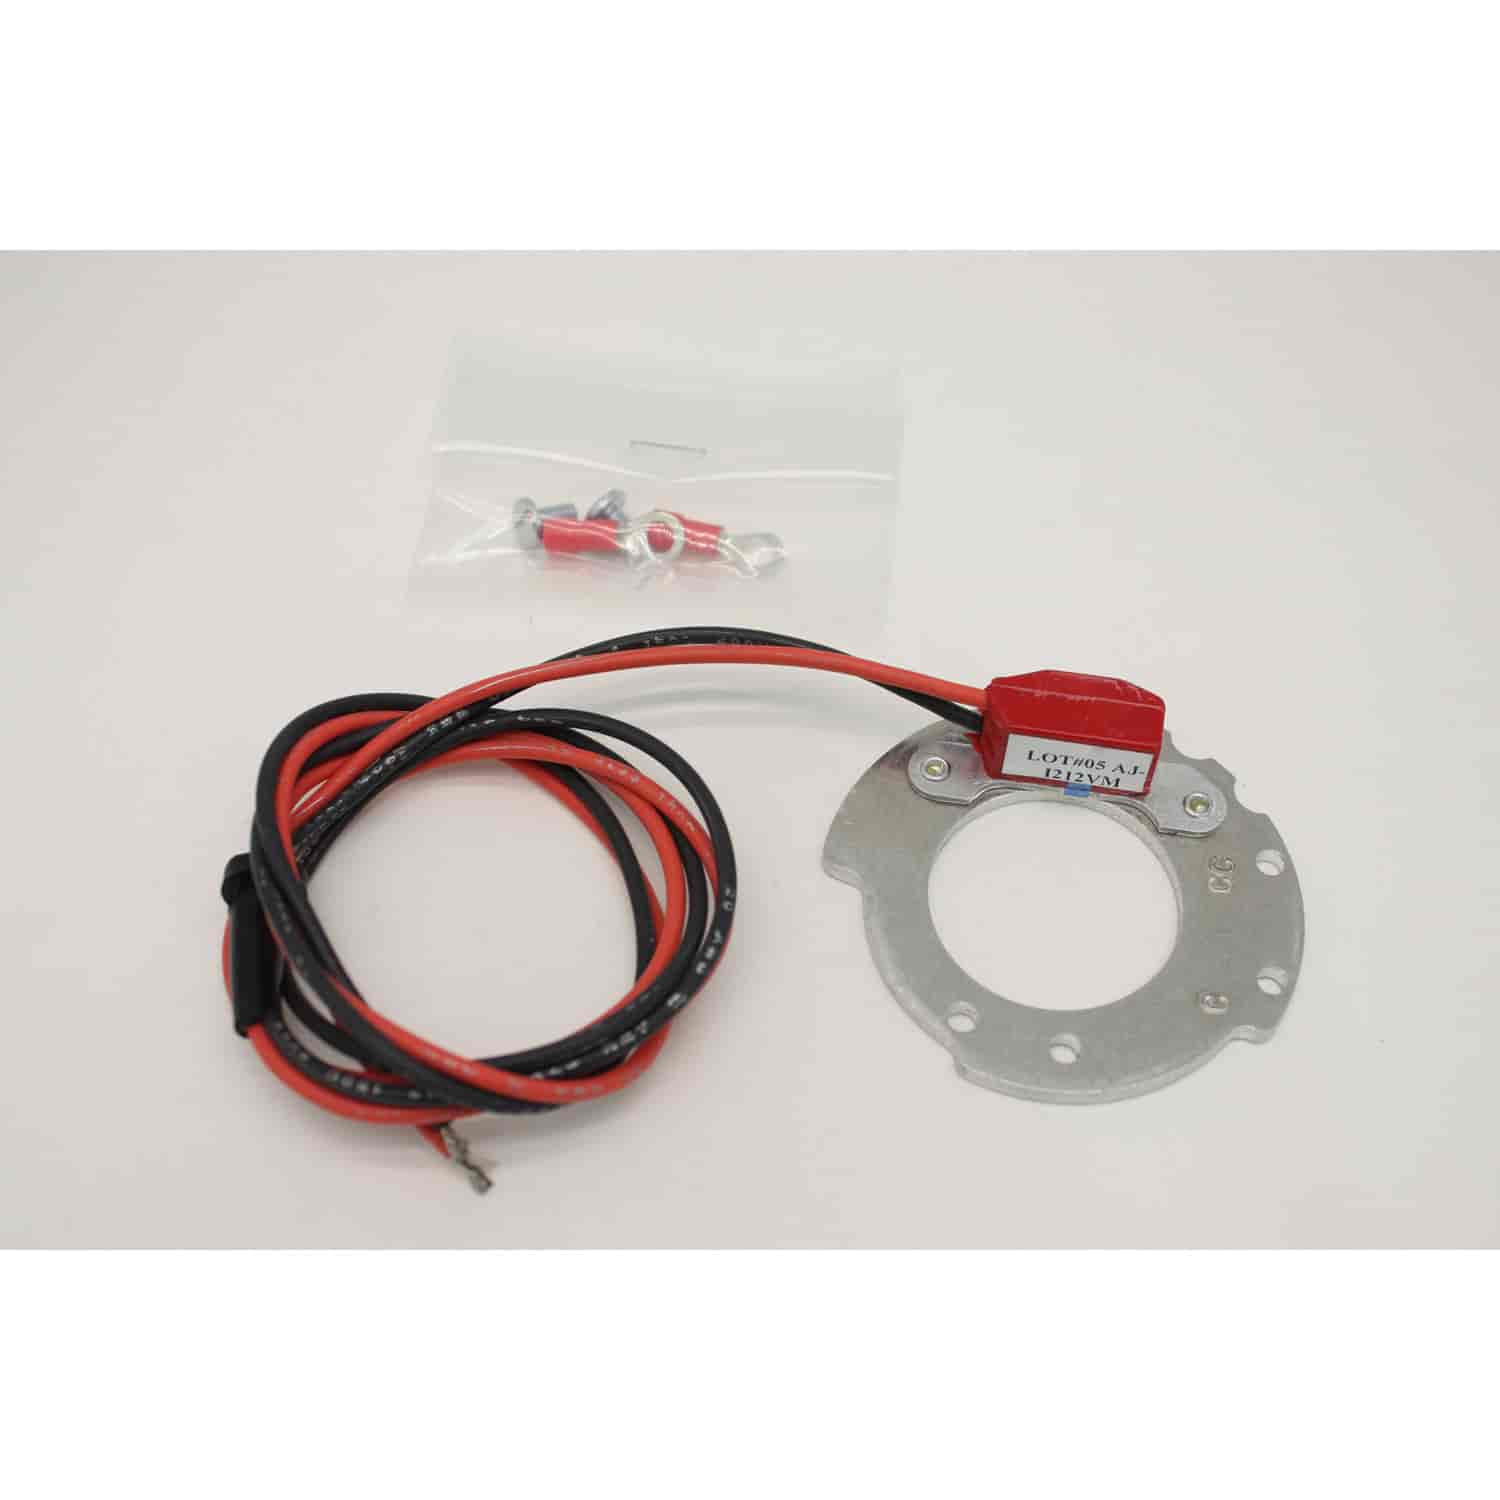 Module replacement for 1244A Ignitor Kit